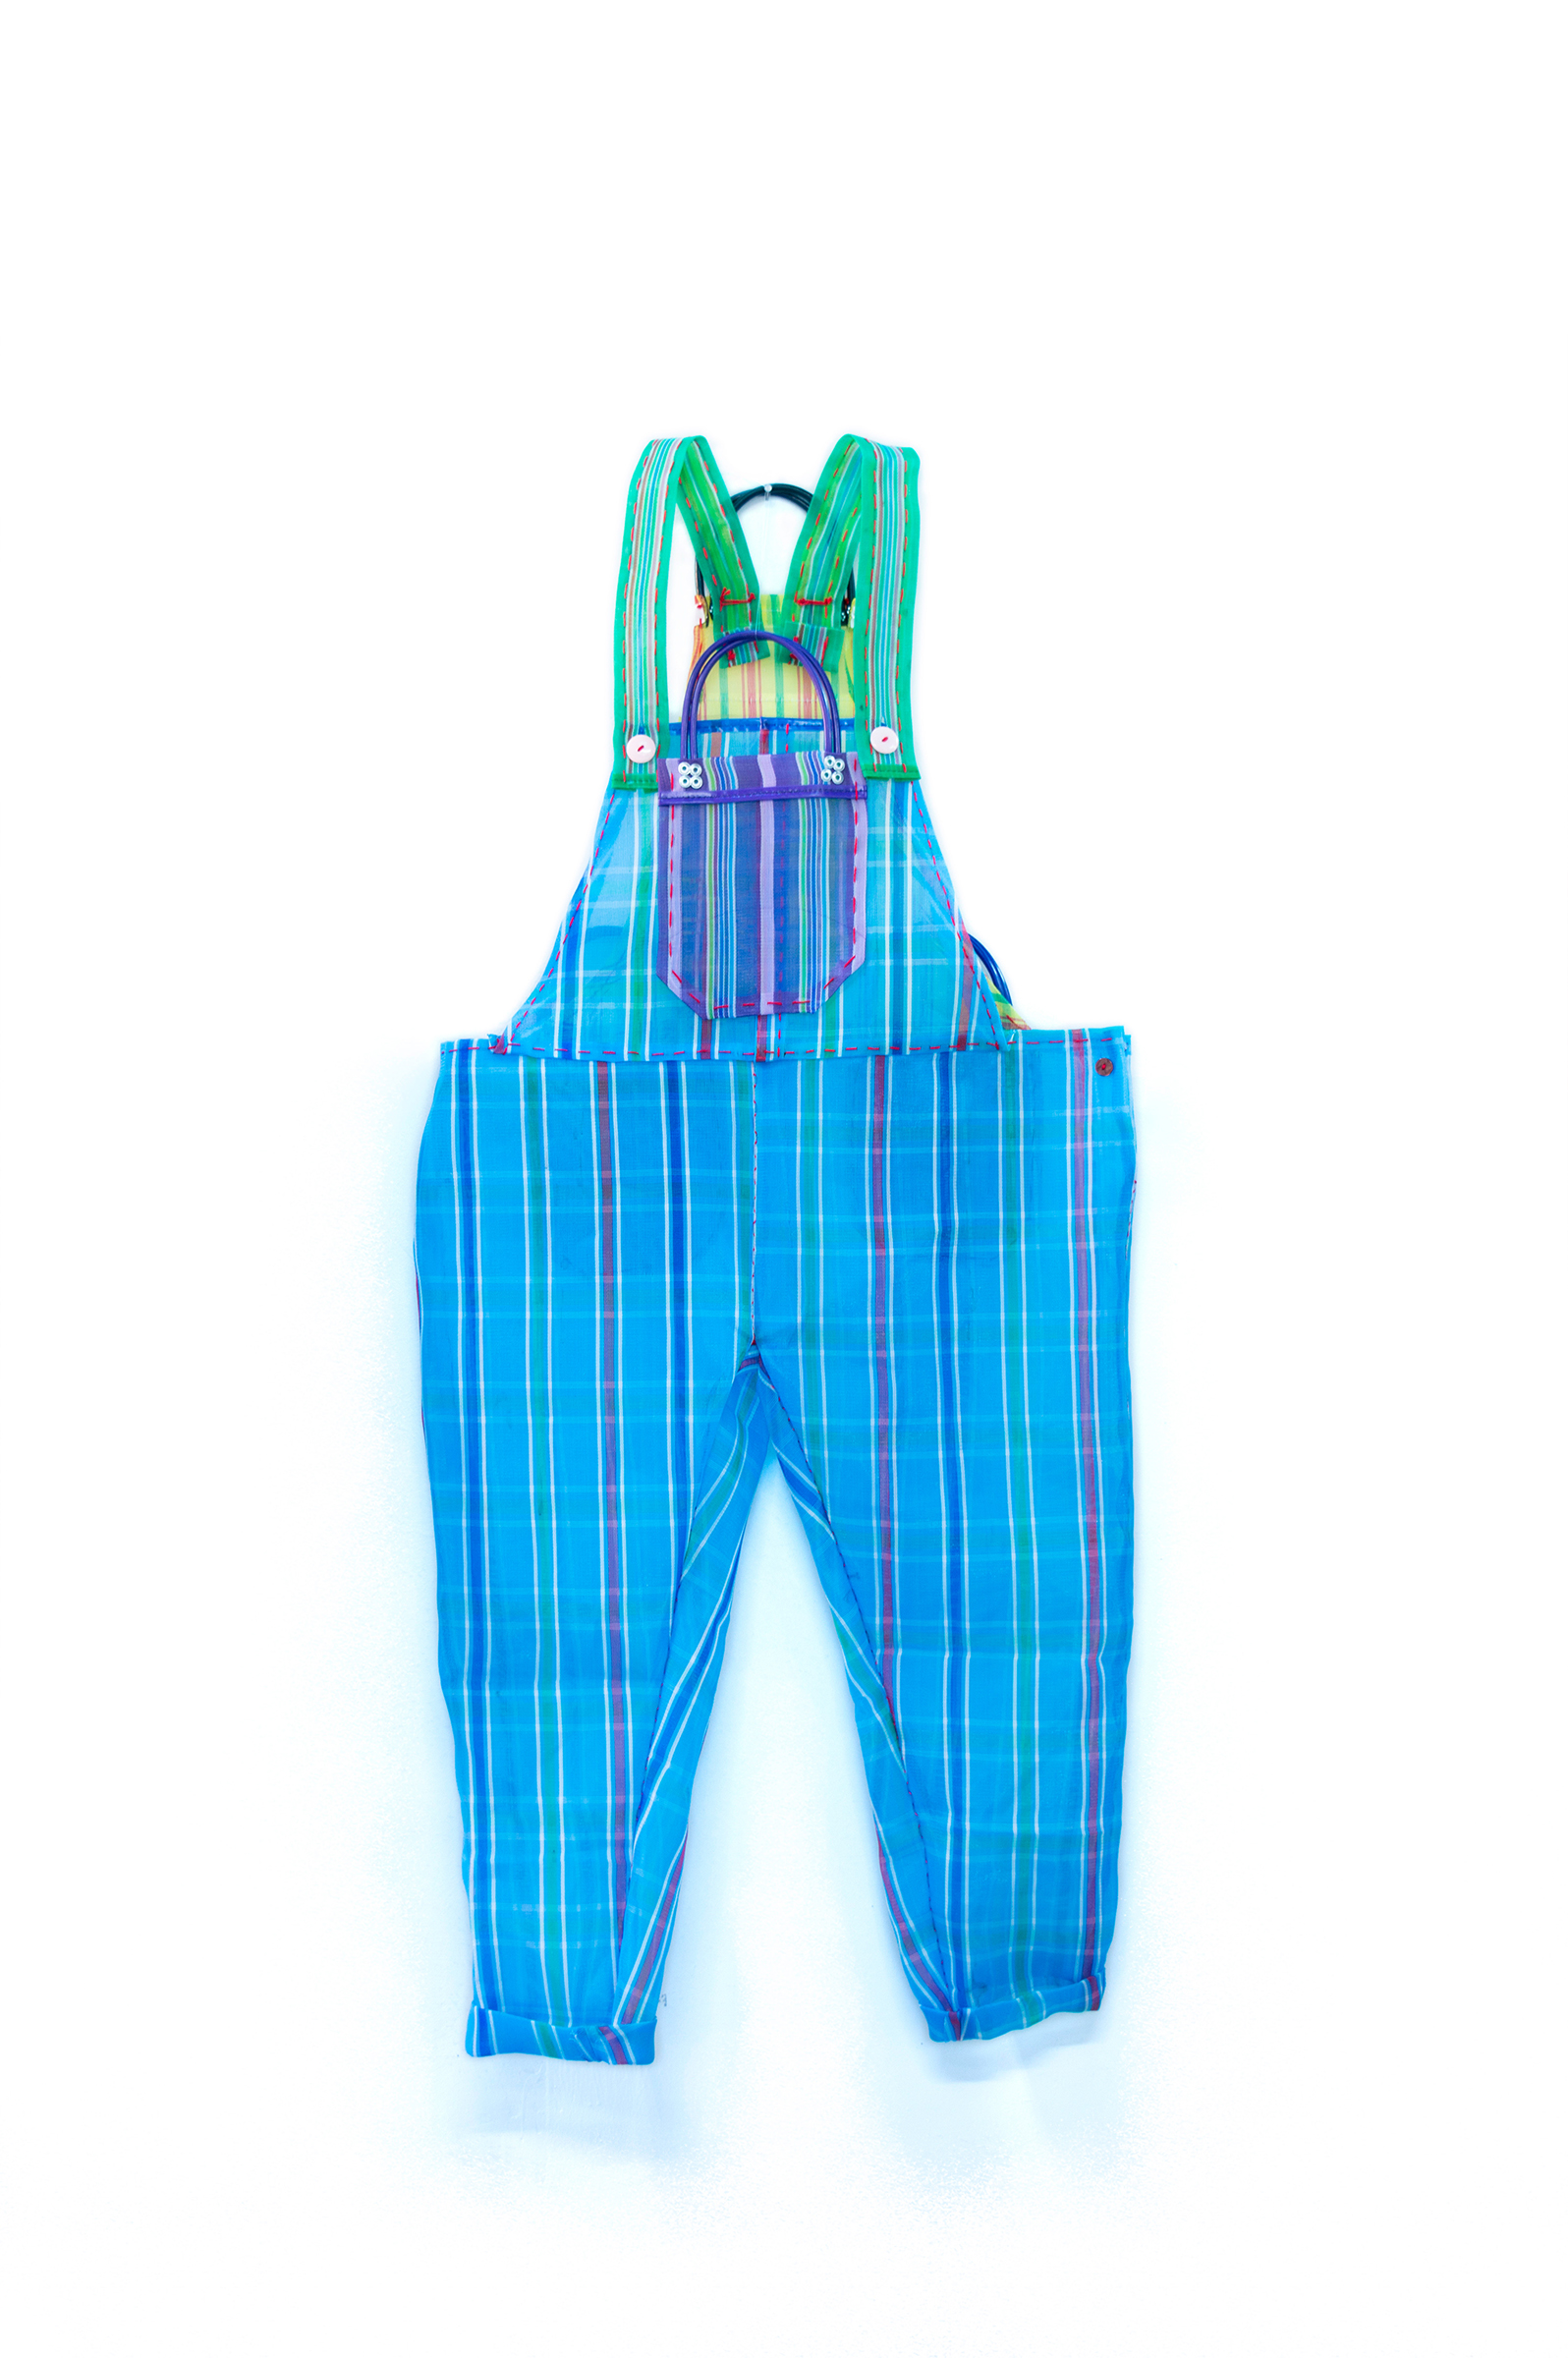 This photograph features a pair of hand-stitched blue overalls with a purple front pocket and green shoulder straps. The overalls are constructed from striped market bags, and the handles of the bags are incorporated into the back of the overalls and the top of the front pocket. The overalls appear against a simple white background.